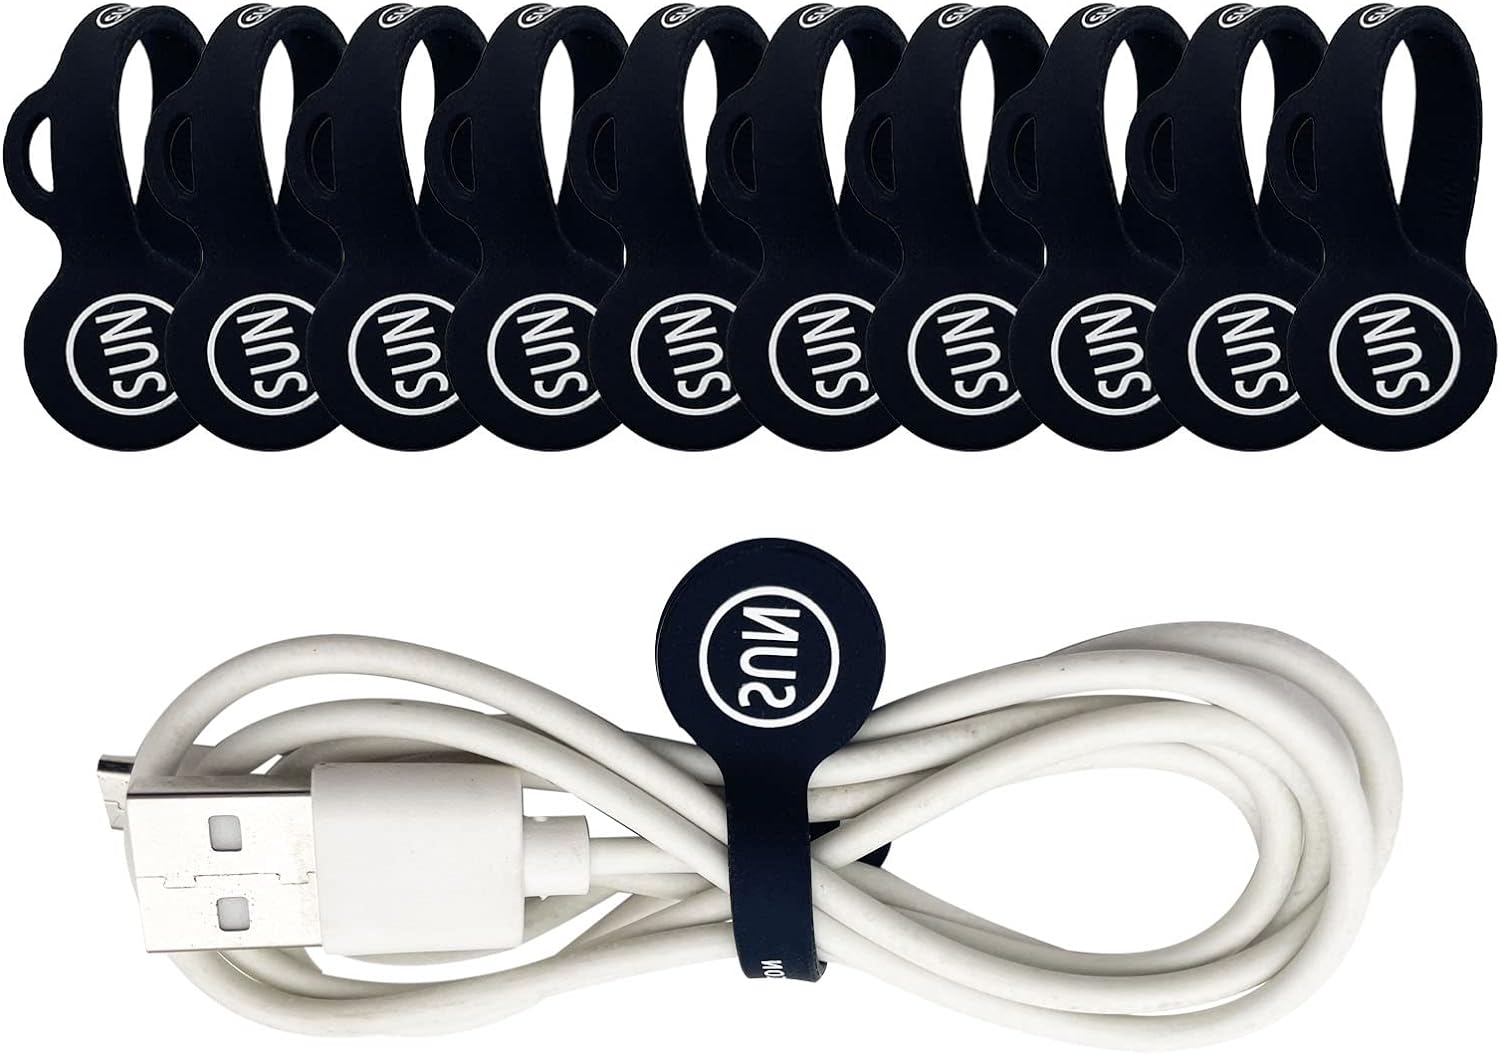 SUNFICON 10 Pack Magnetic Cable Clips Cable Organizers Earbuds Cords Clips Bookmark Whiteboard Noticeboard Fridge Magnets USB Cable Managers Keepers Ties Straps for Home Kitchen,Office,School, Black